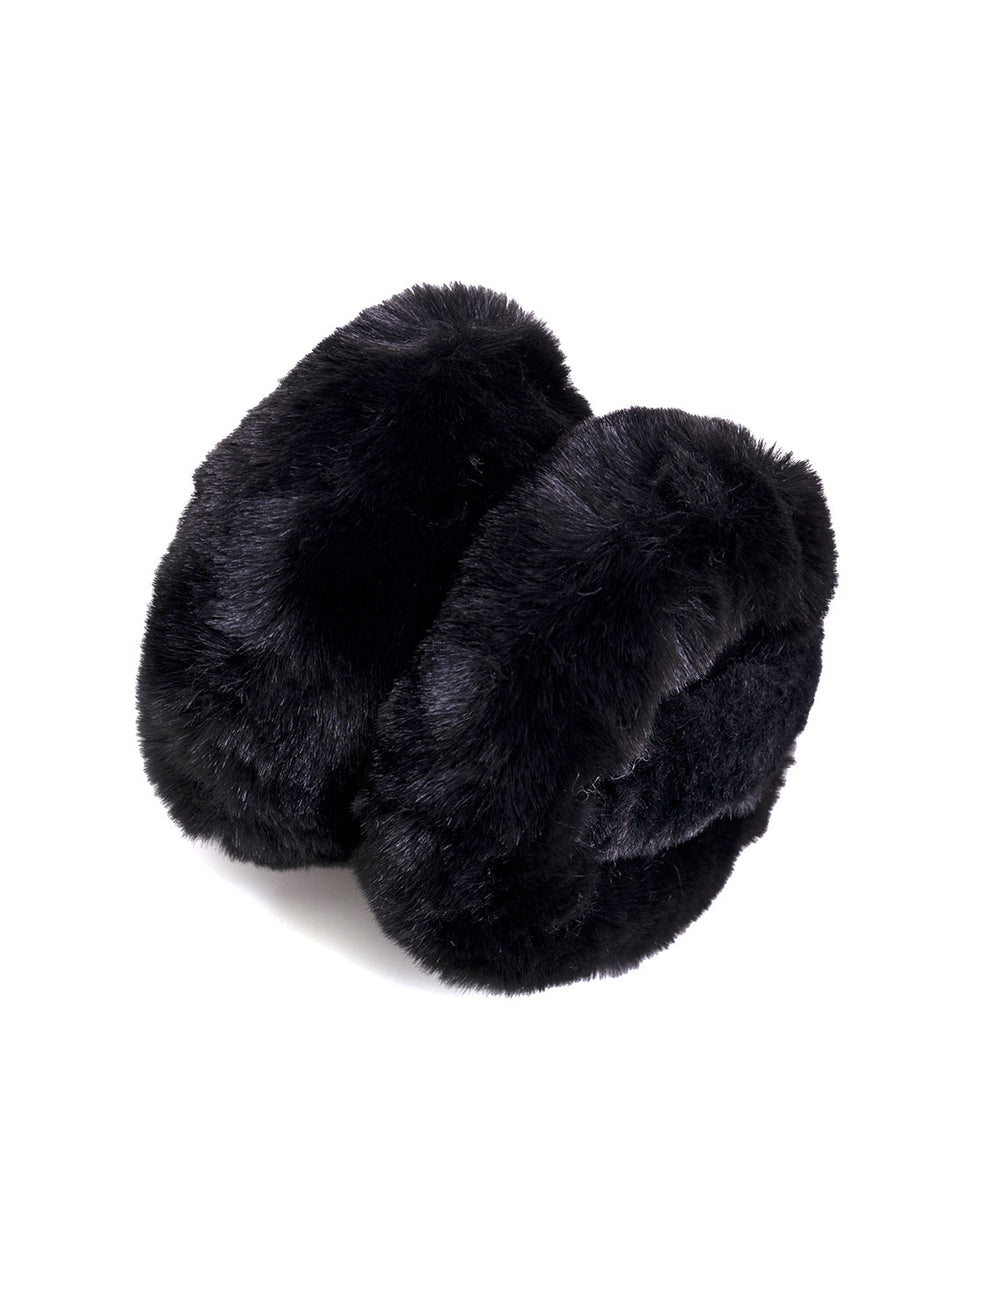 Compact view of Hat Attack's oversized faux fur earmuffs.